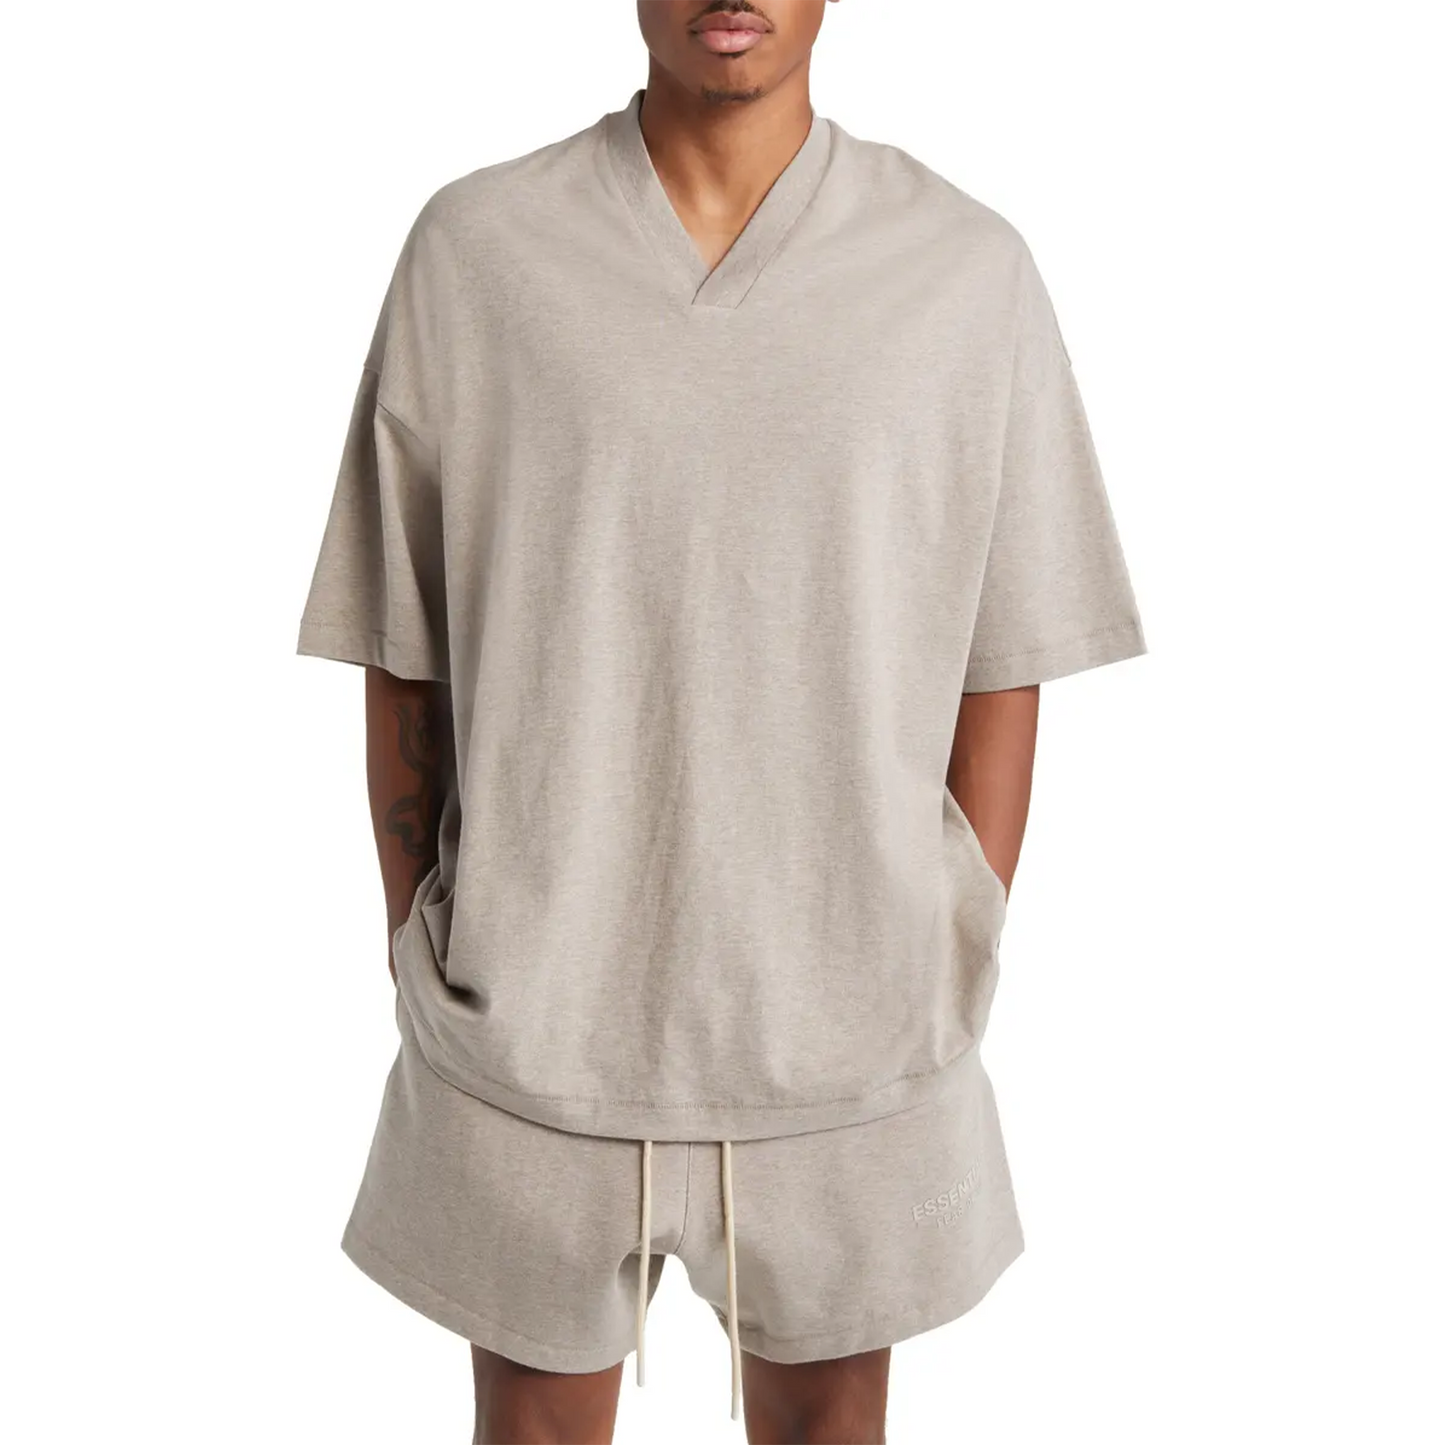 Fear of God Essentials V-Neck Tee Core Heather (SS24)